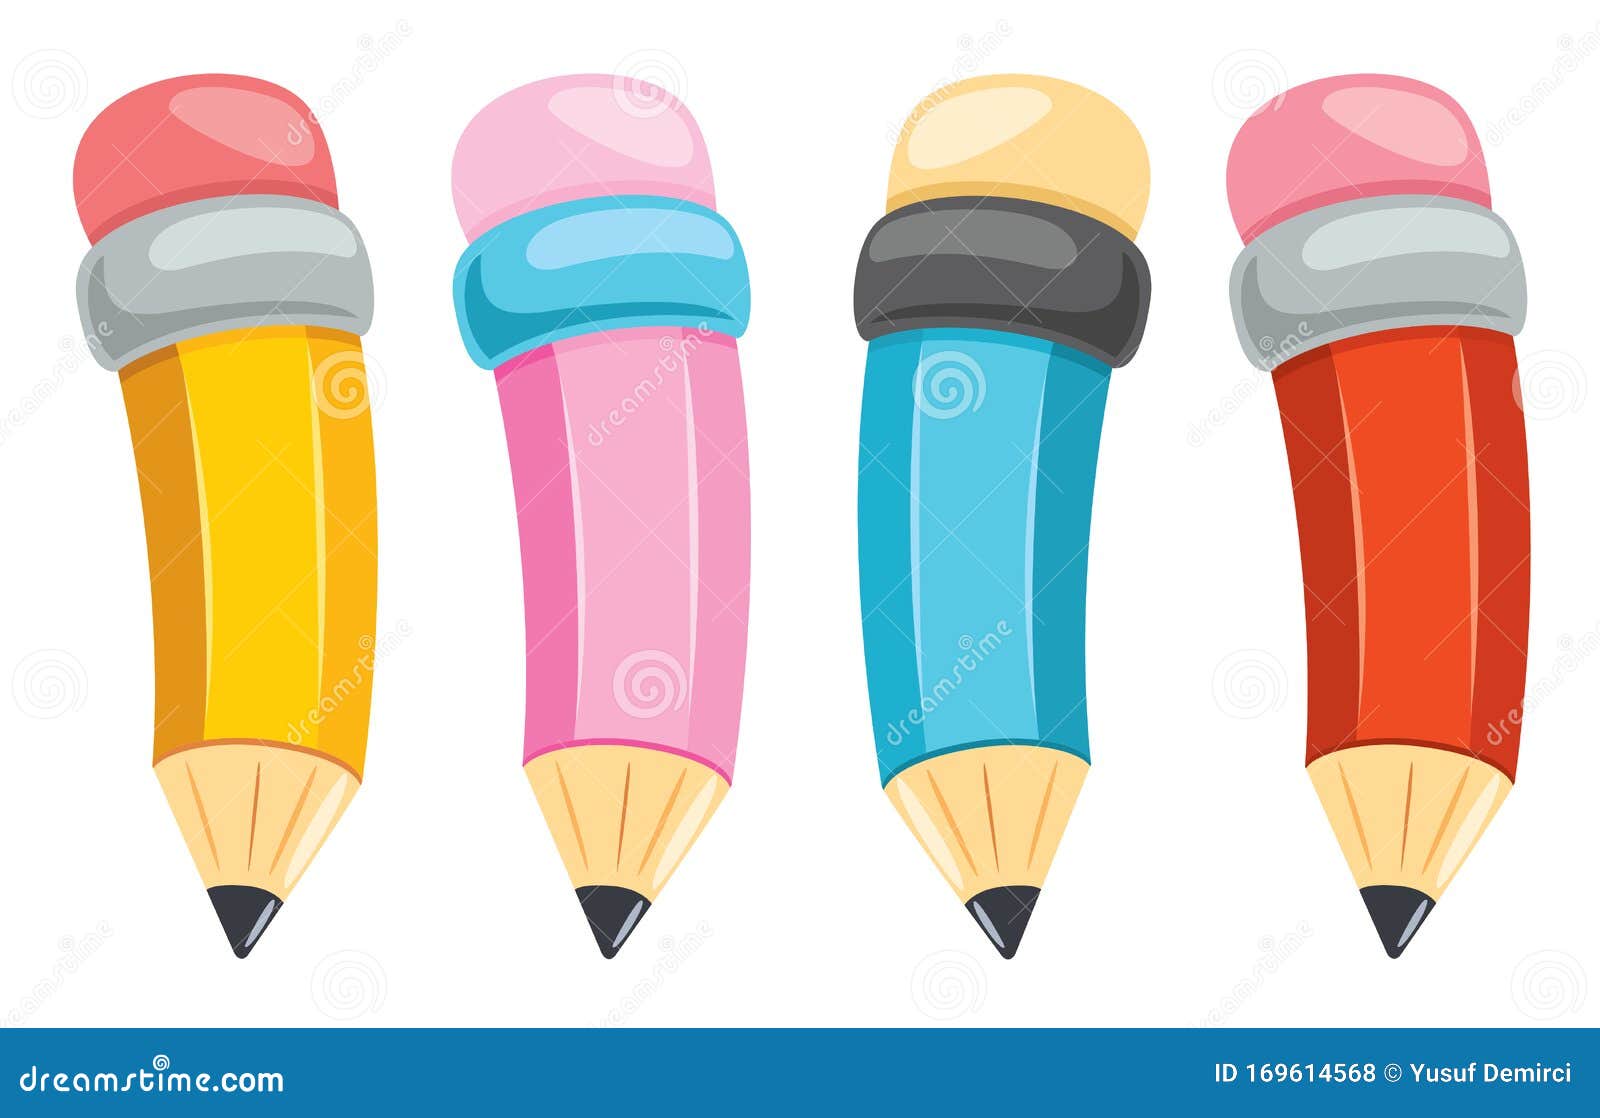 Colorful Pencils for Kids Education Stock Vector - Illustration of happy,  book: 169614568